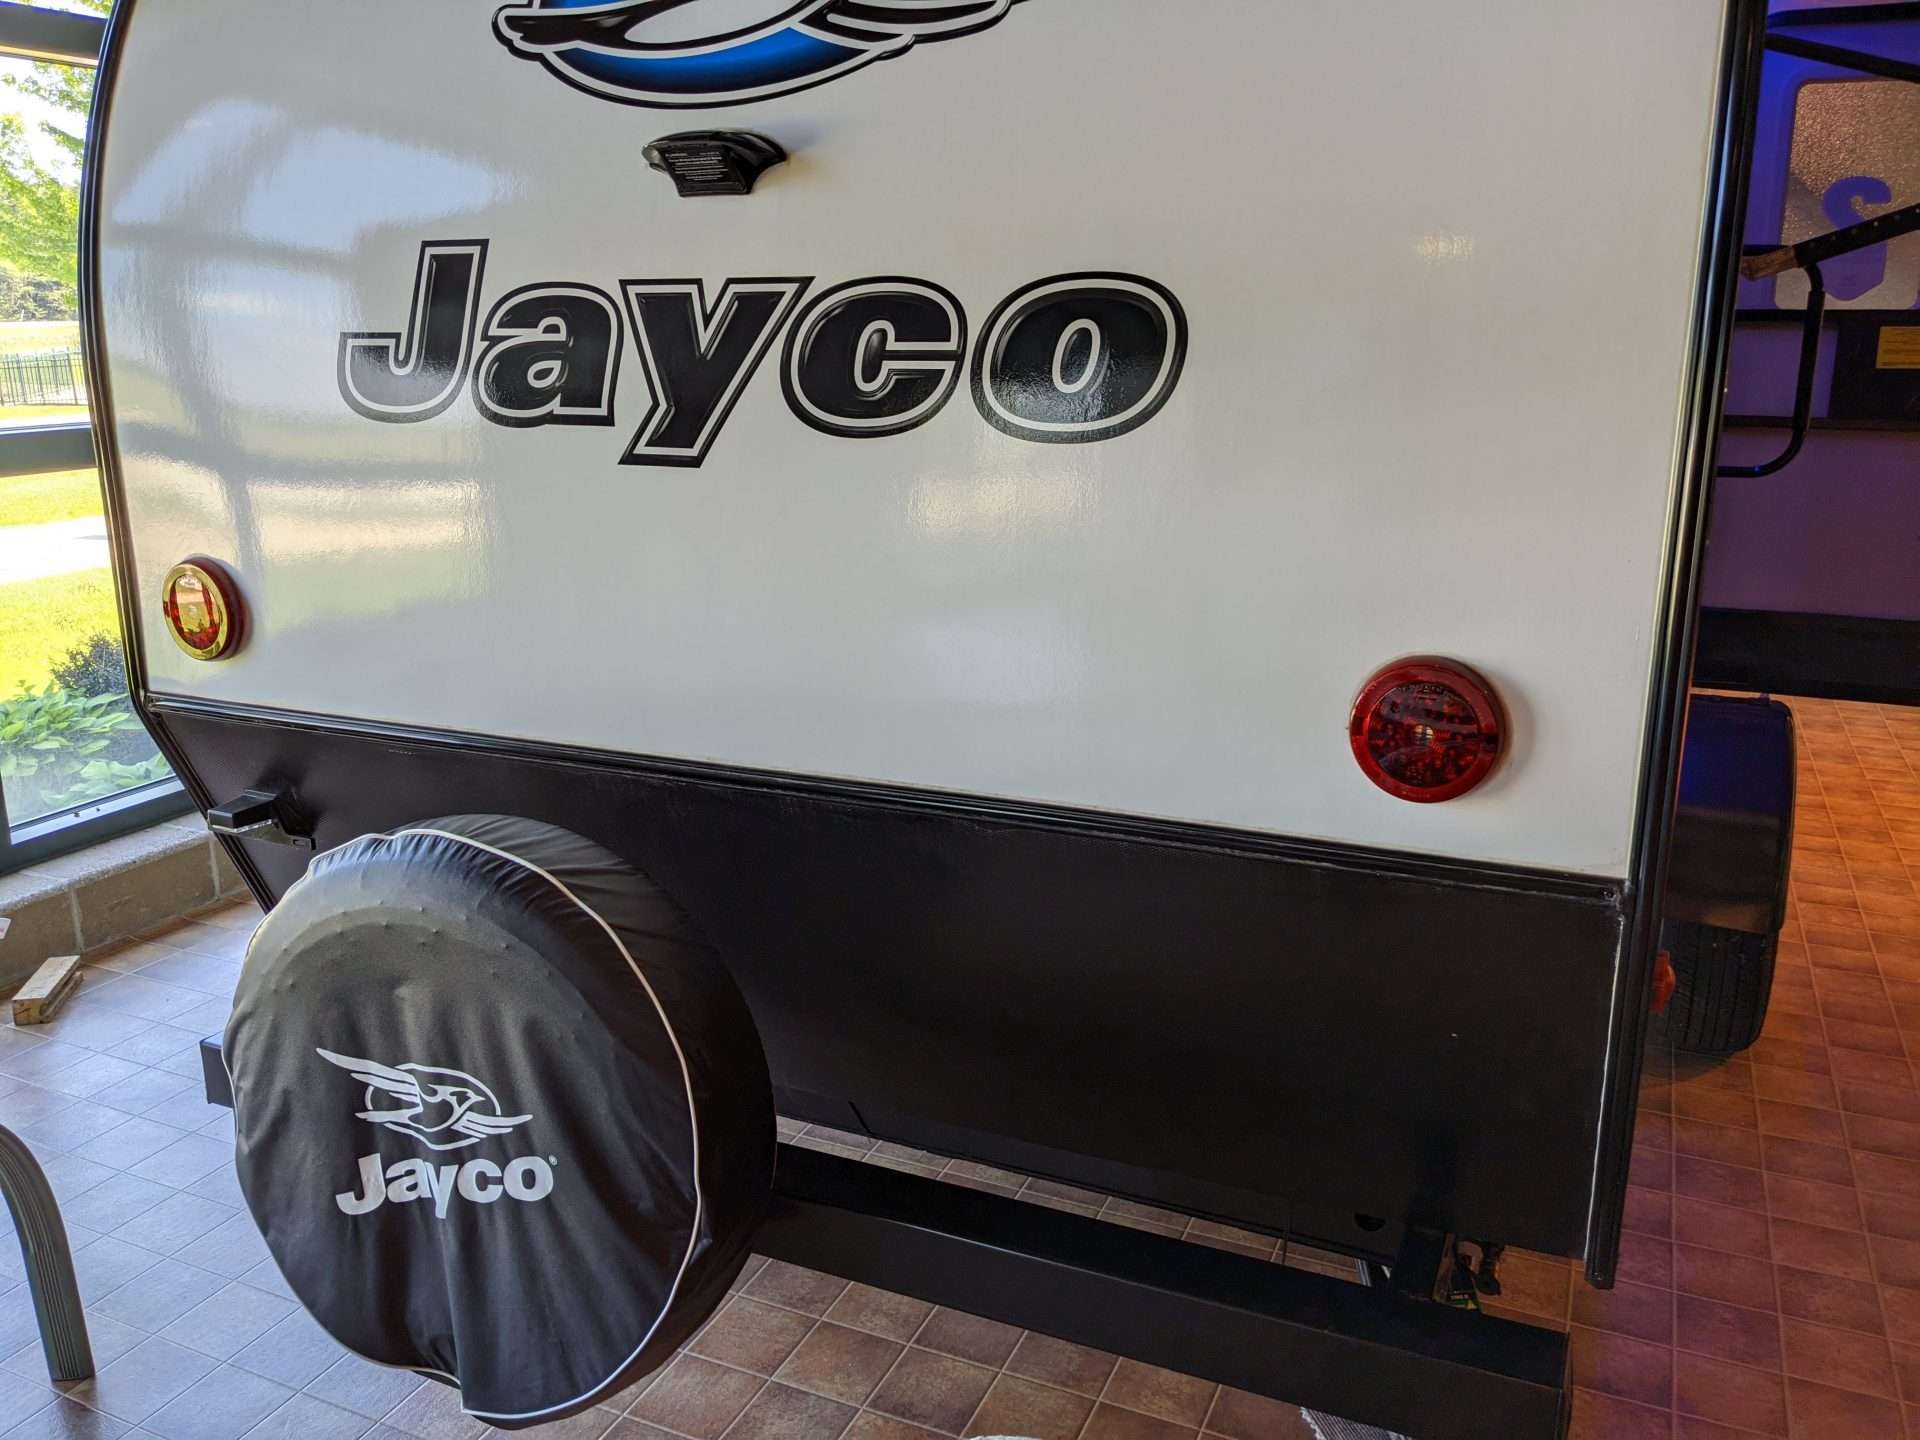 Jayco spare tire cover